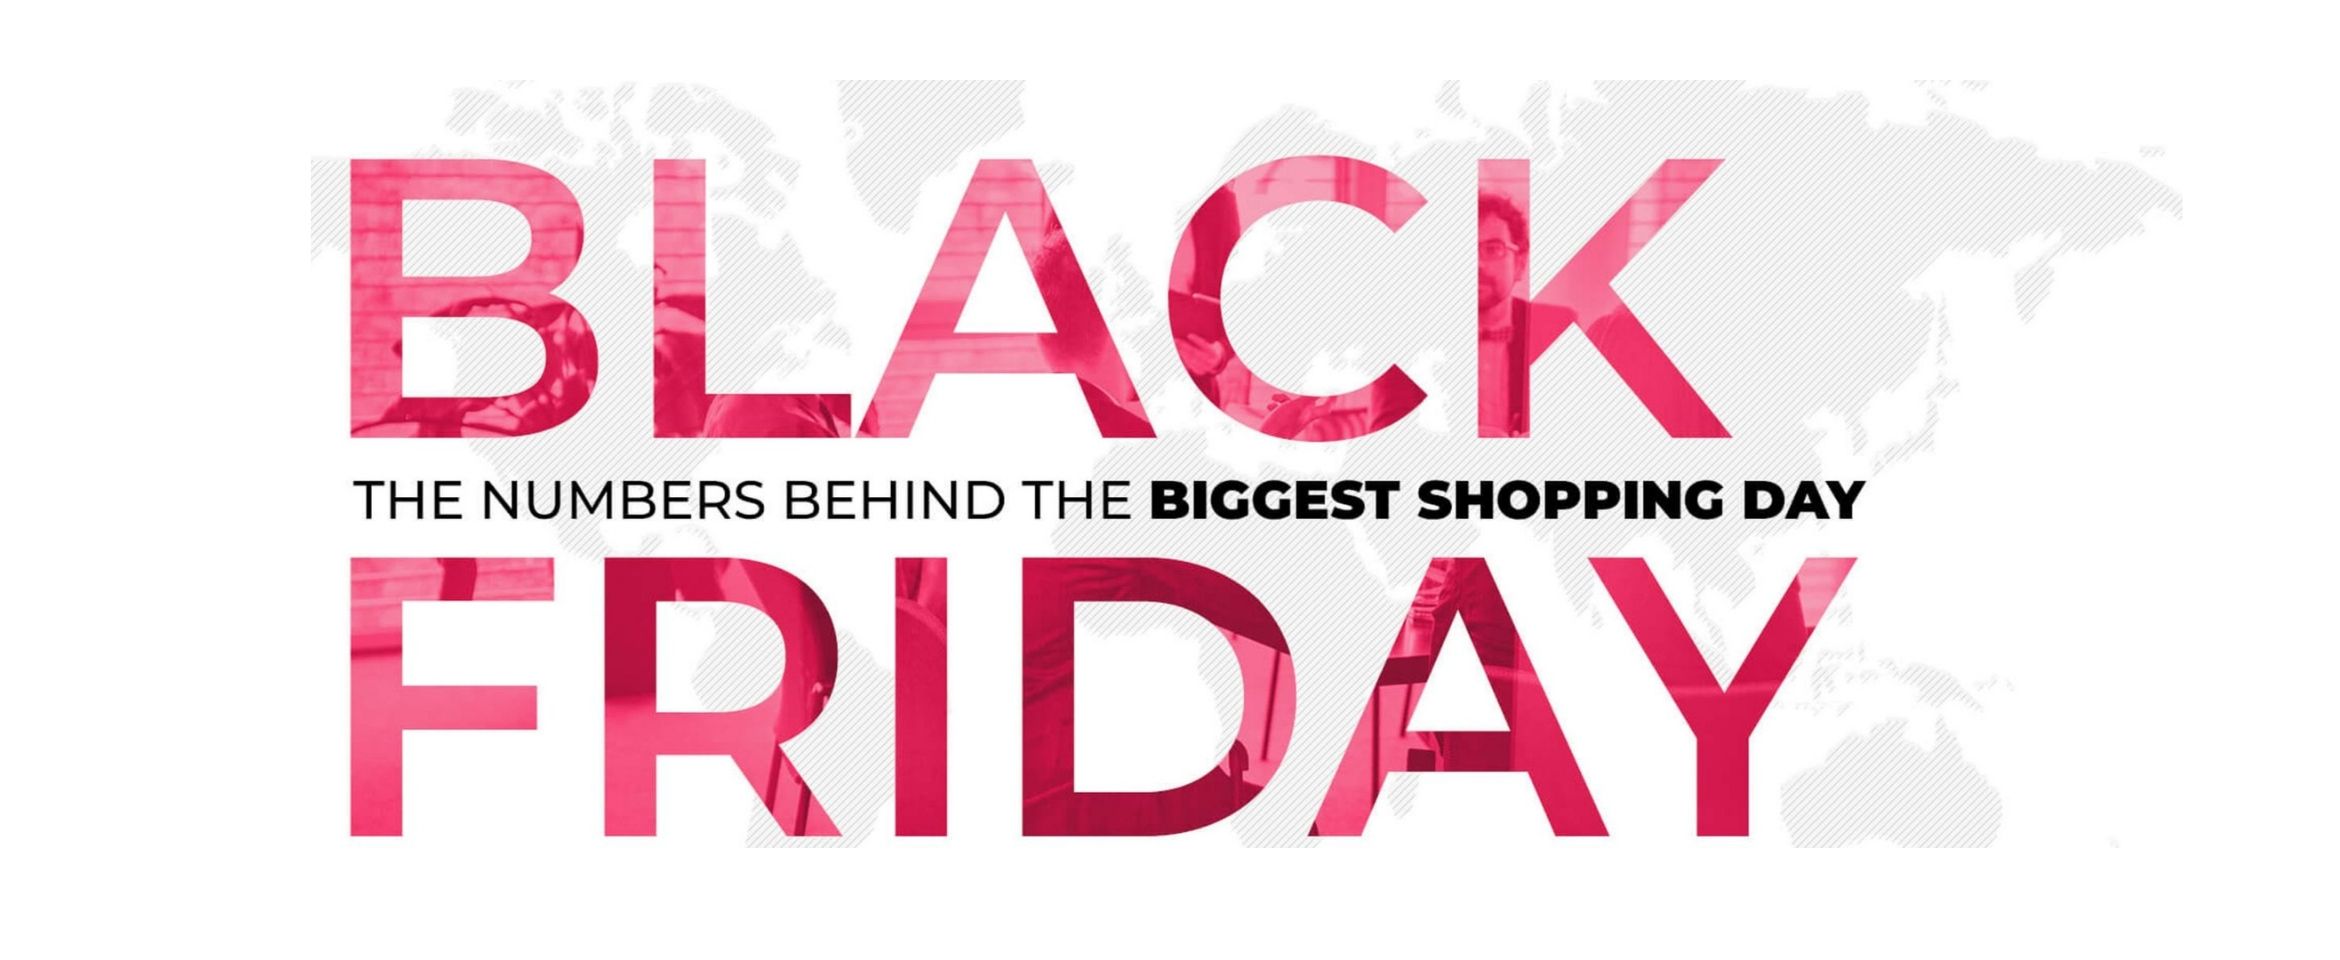 BLACK FRIDAY. THE NUMBERS BEHIND THE BIGGEST SHOPPING DAY